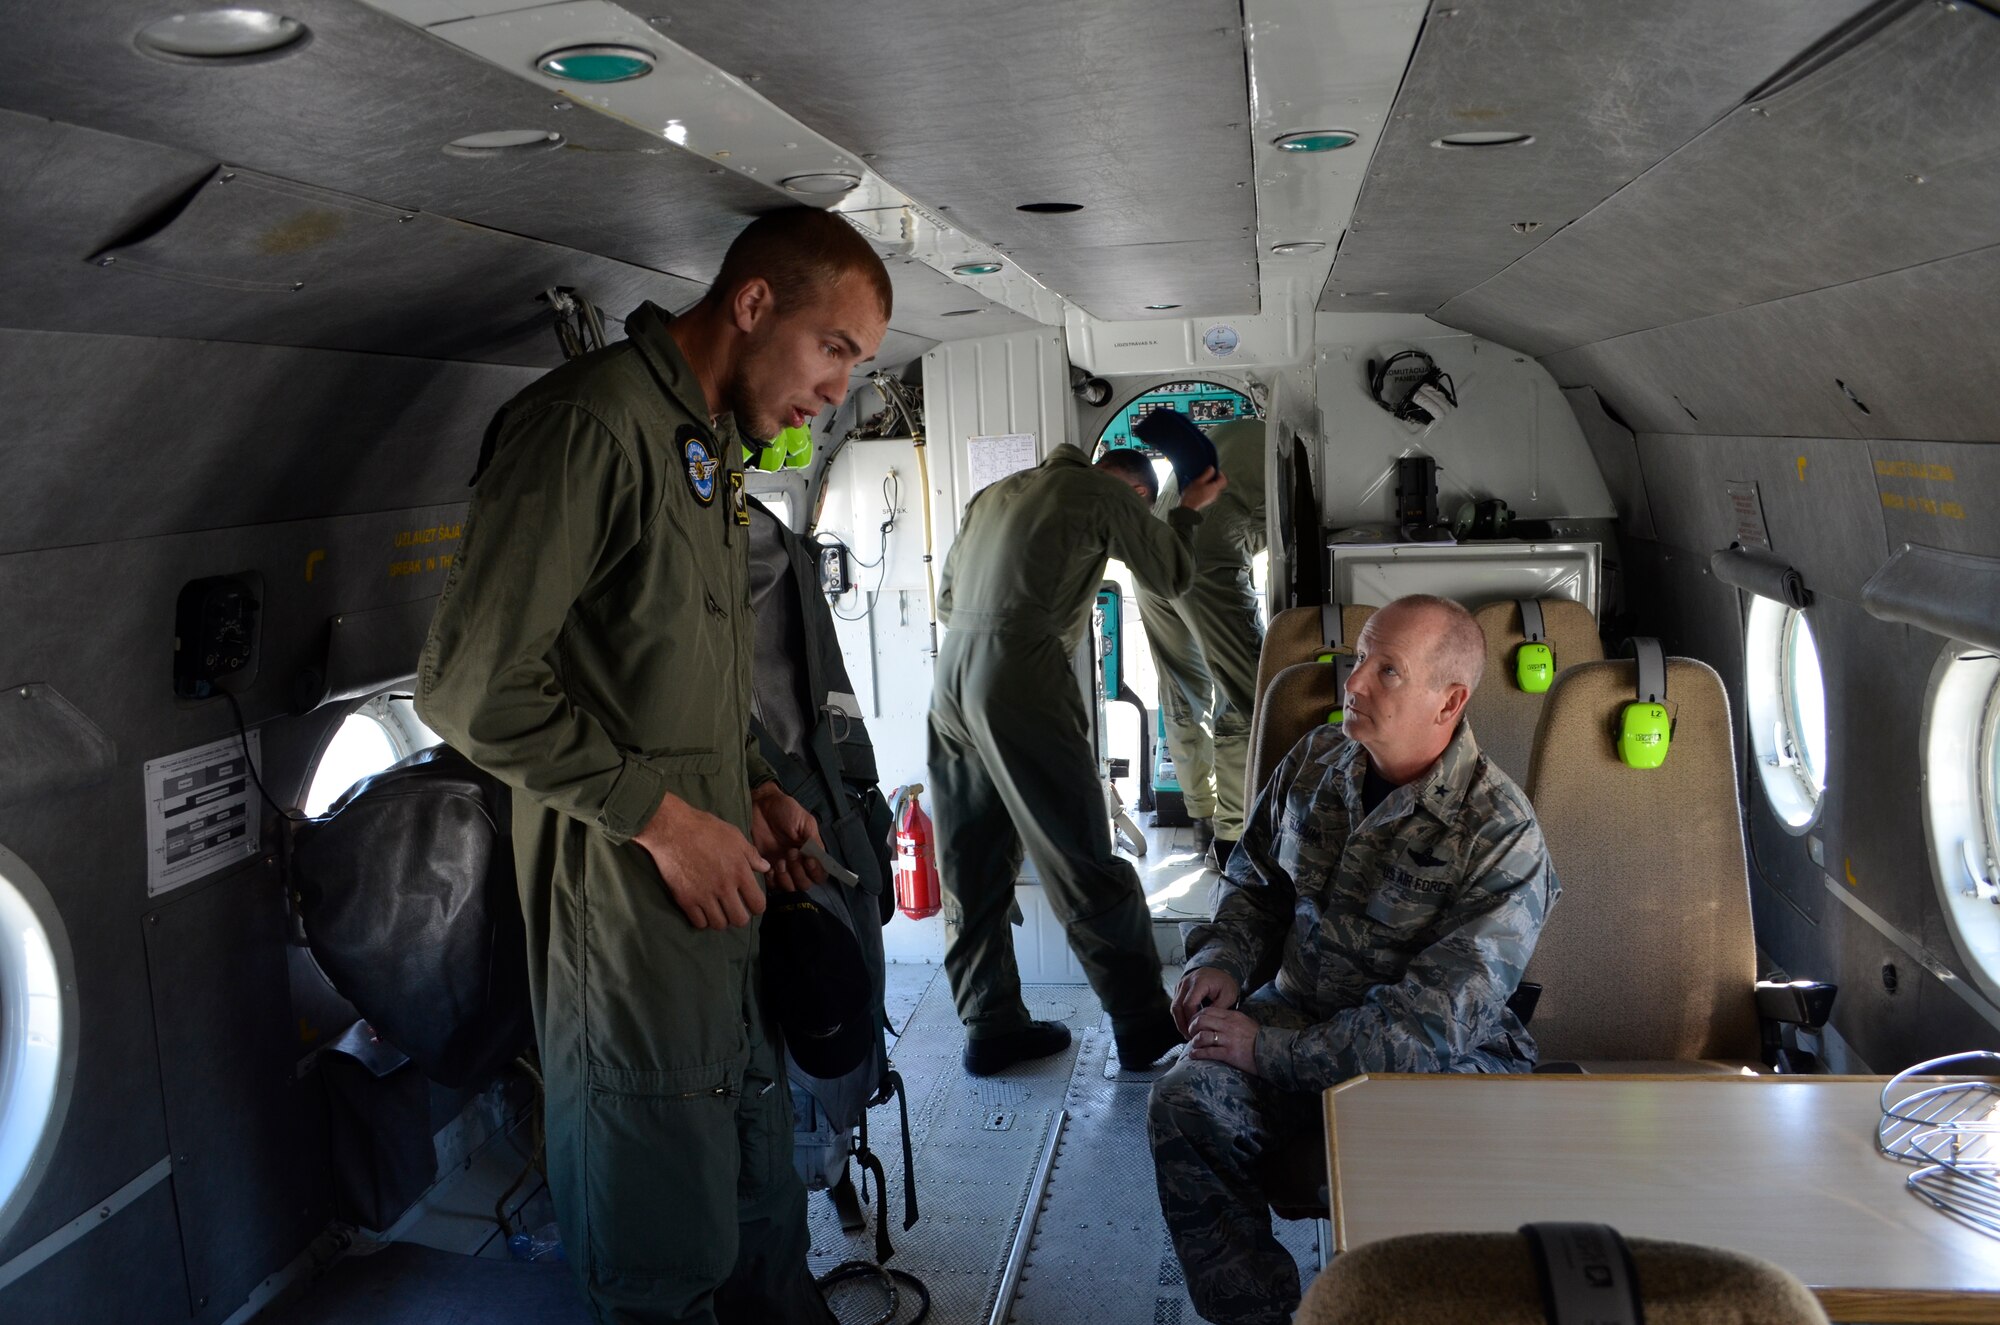 Brig. Gen. John D. Slocum, 127th Wing commander, Michigan Air National Guard, is given a safety briefing by a Latvian Air Force crew member on board a MI-17 helicopter at Lielvarde Air Base, Latvia, on June 12. Slocum is being transported to Rezekne to be a guest of honor in a Latvian National Guard change of command ceremony. The Michigan National Guard is part of a Department of Defense sponsored State Partnership Program between Michigan and the Latvian government that began in 1993 being one of the models for an ongoing program that has united 68 unique security partnerships involving 74 nations around the globe. The 127th Wing is participating in Saber Strike, an annual exercise that has brought 14 ally and partner nations together to increase interoperability between military forces. (U.S. Air National Guard photo by Capt. Anthony J. Lesterson)